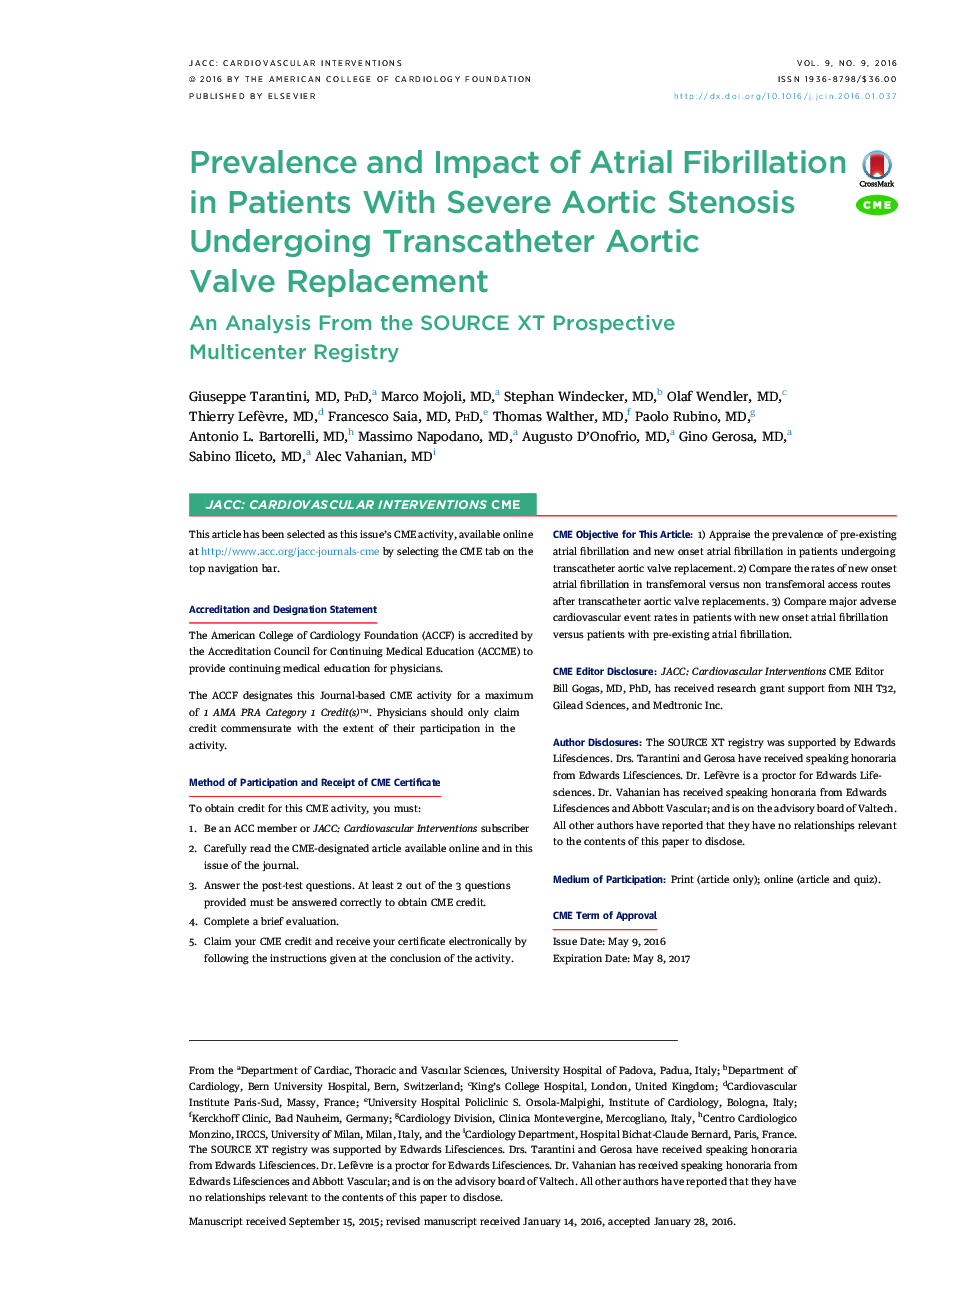 Prevalence and Impact of Atrial Fibrillation in Patients With Severe Aortic Stenosis Undergoing Transcatheter Aortic Valve Replacement : An Analysis From the SOURCE XT Prospective Multicenter Registry